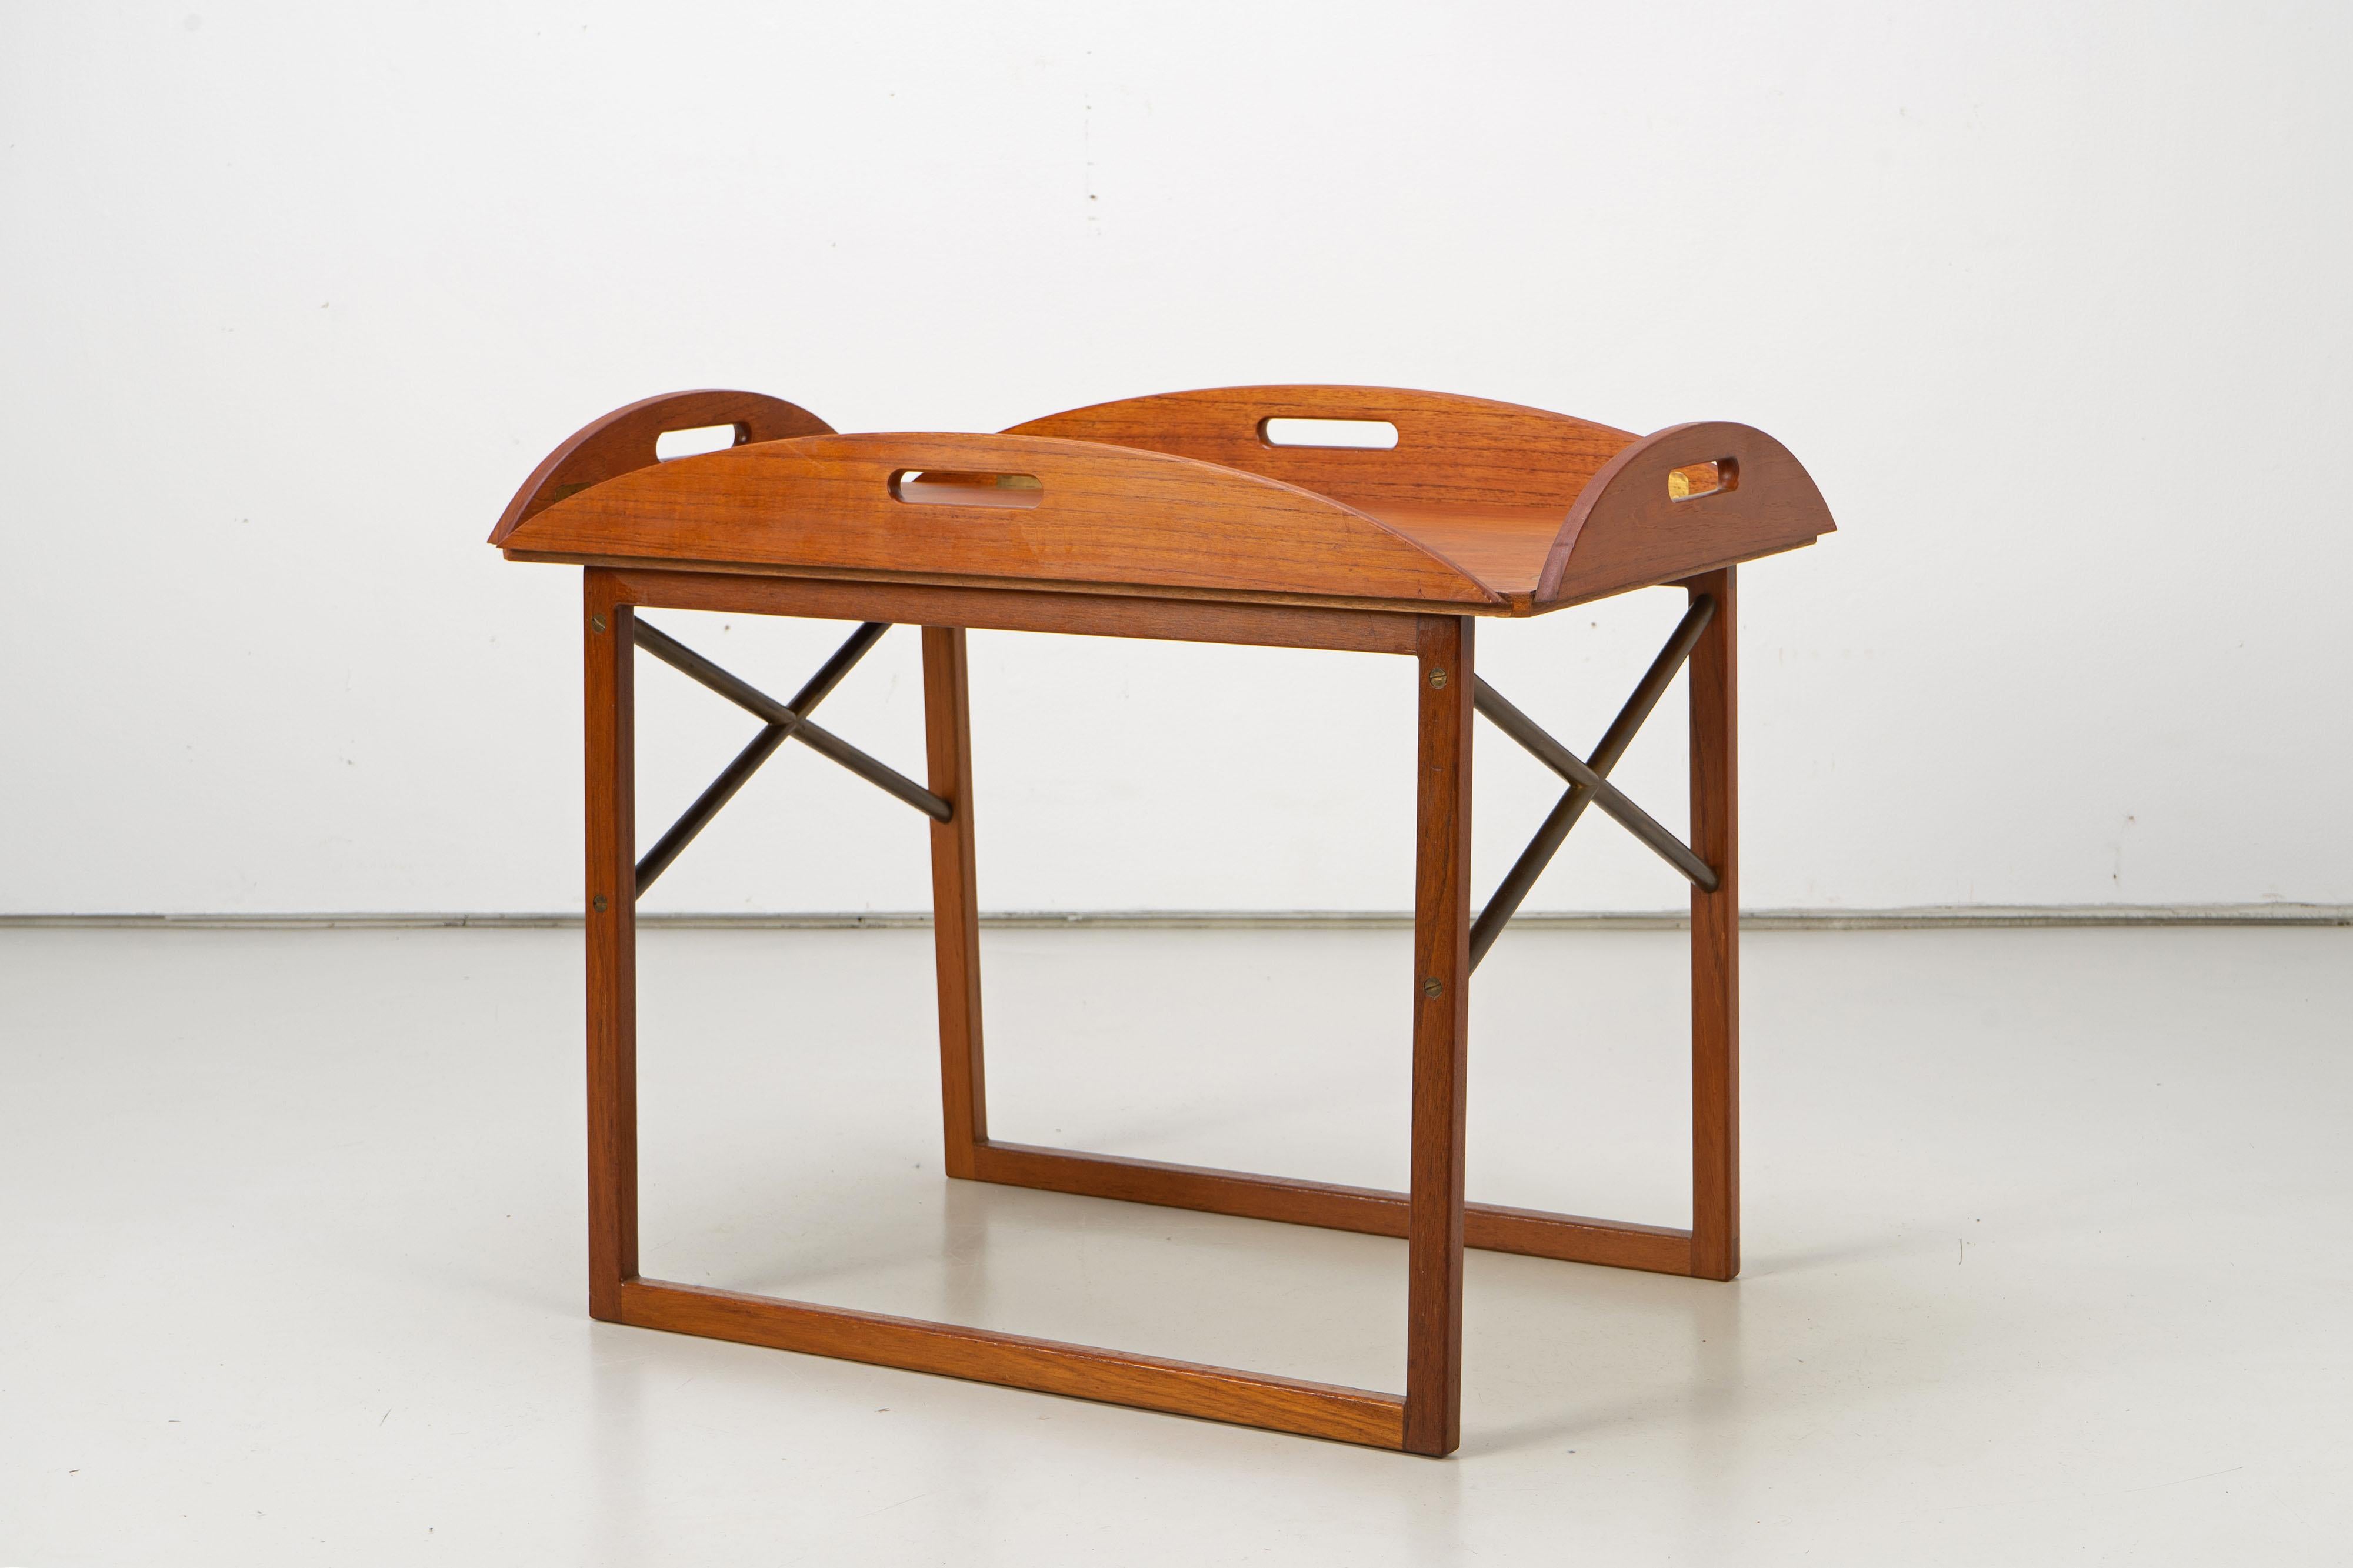 Danish Modern side table by Svend Langkilde. This table features a removable top with folding edges, so it can be used as a tray.